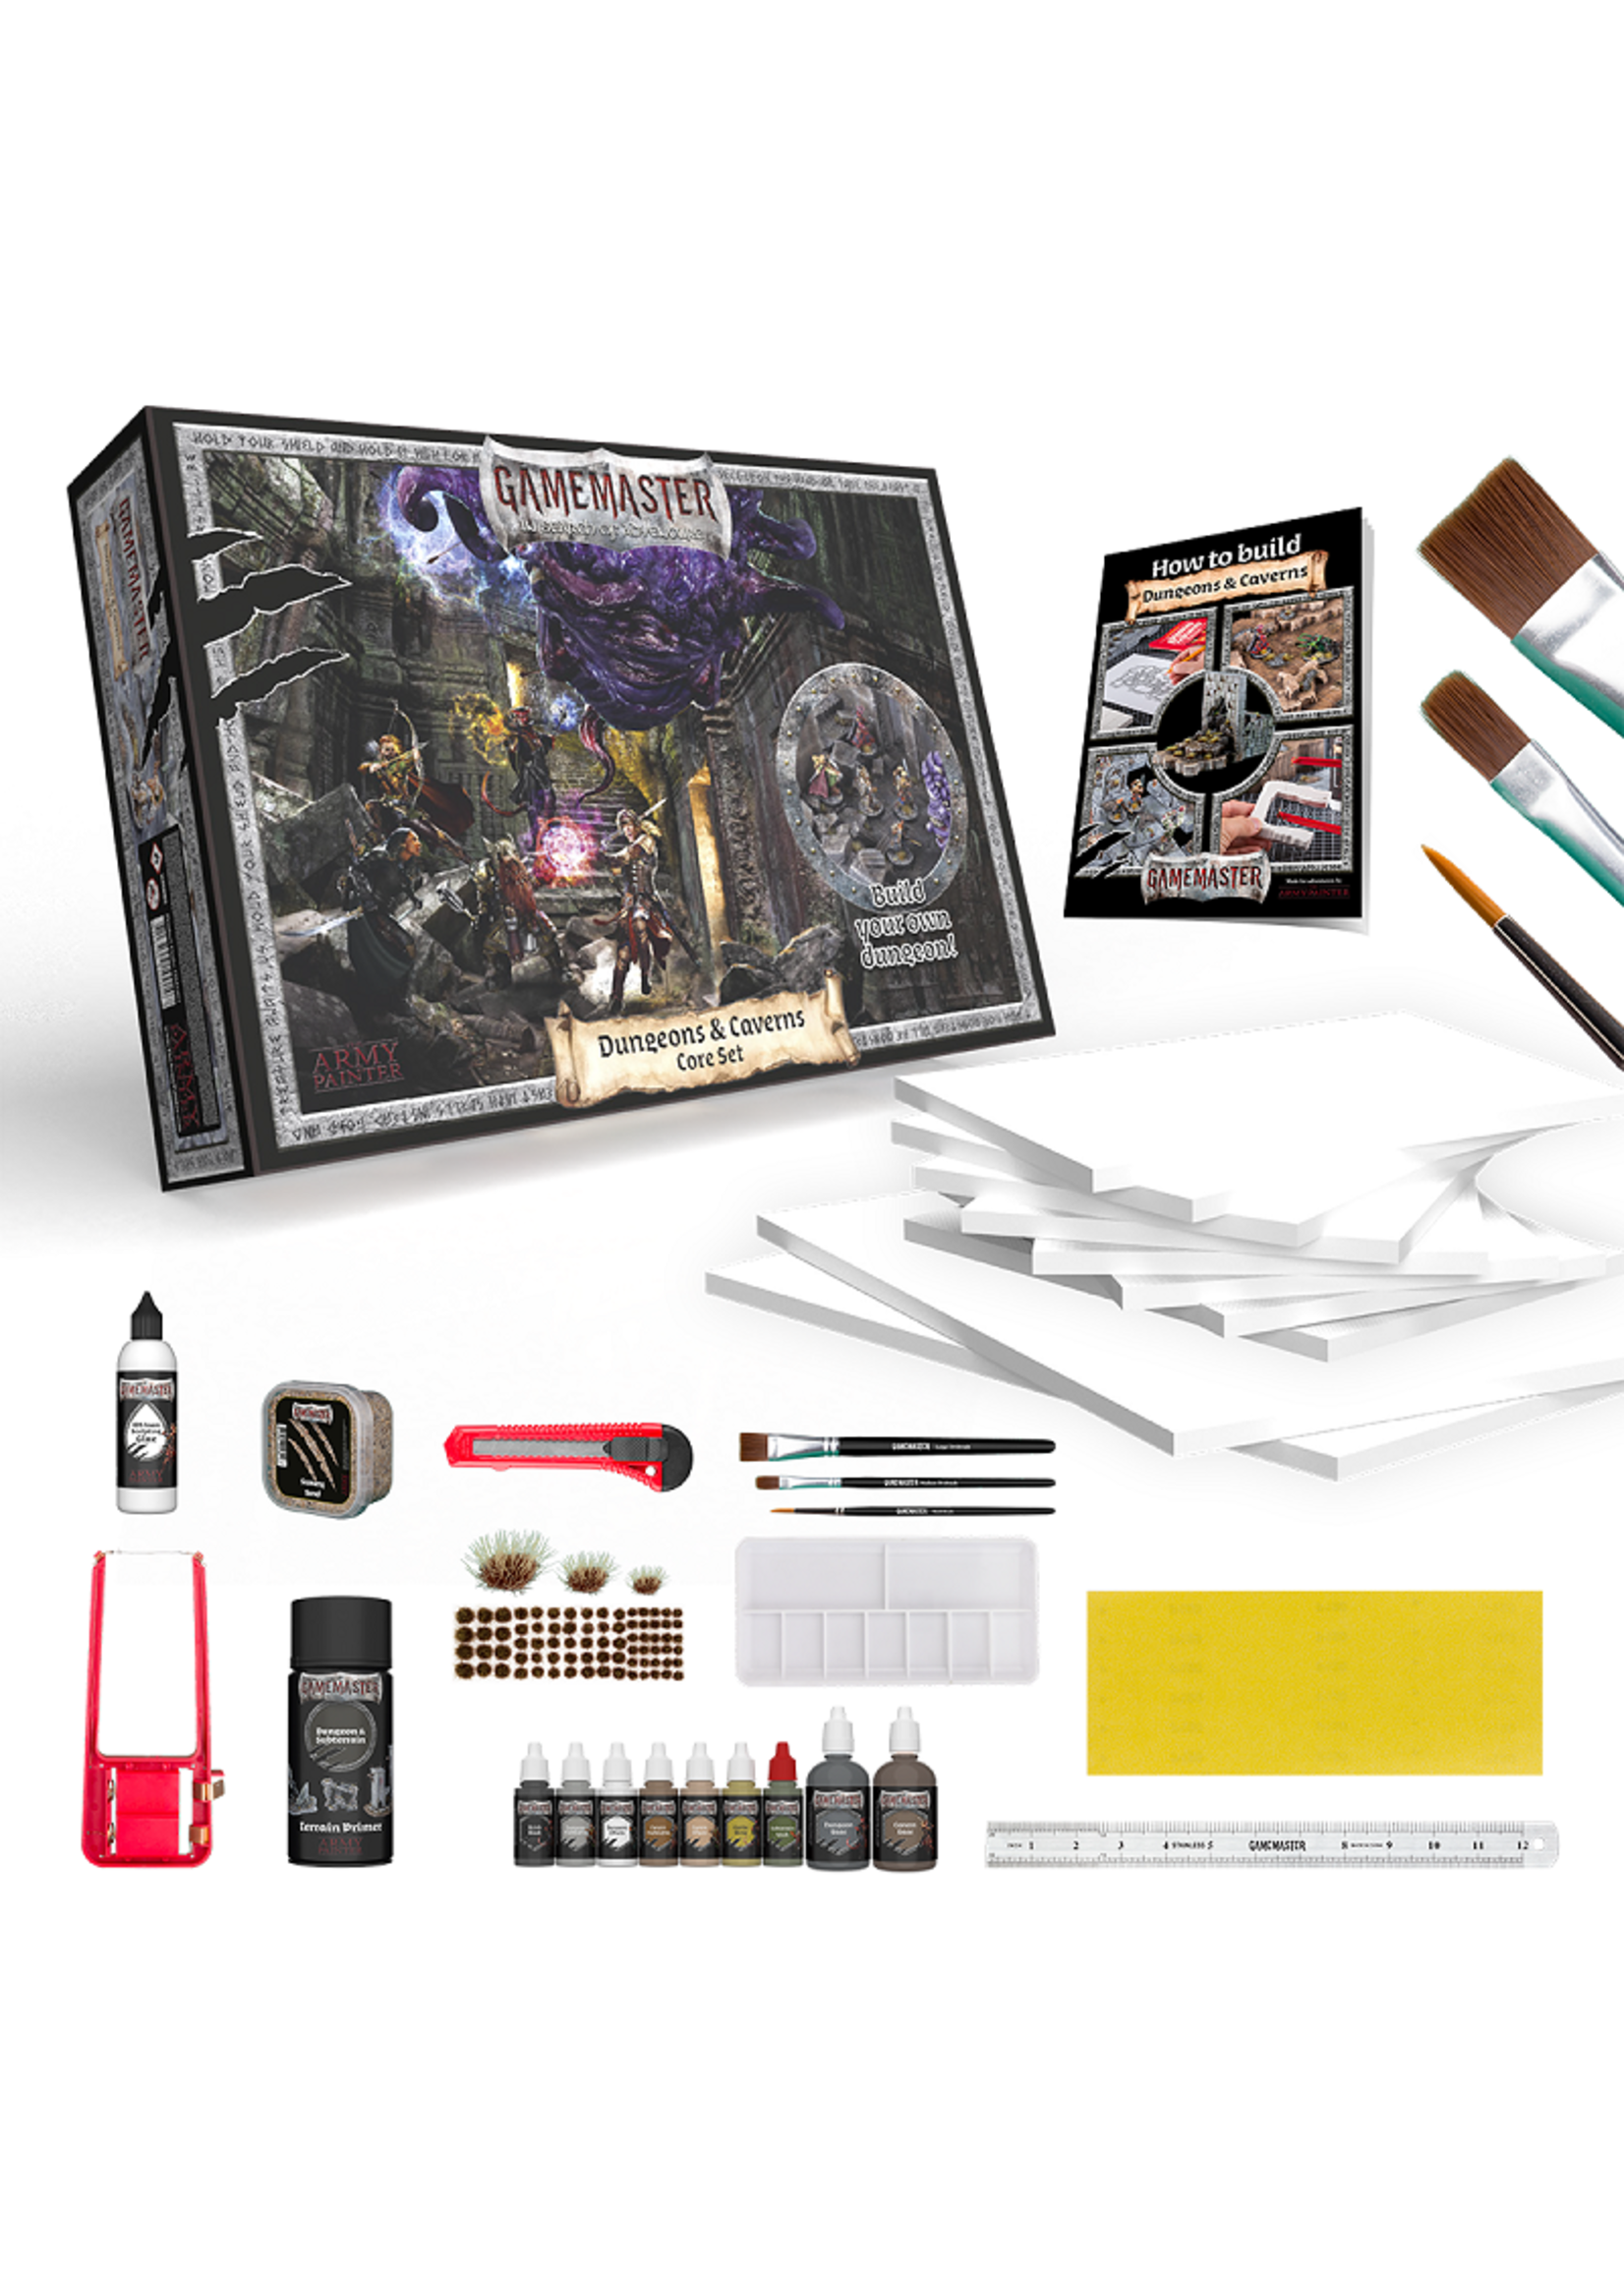 The Army Painter Gamemaster: Dungeons & Caverns Core Set